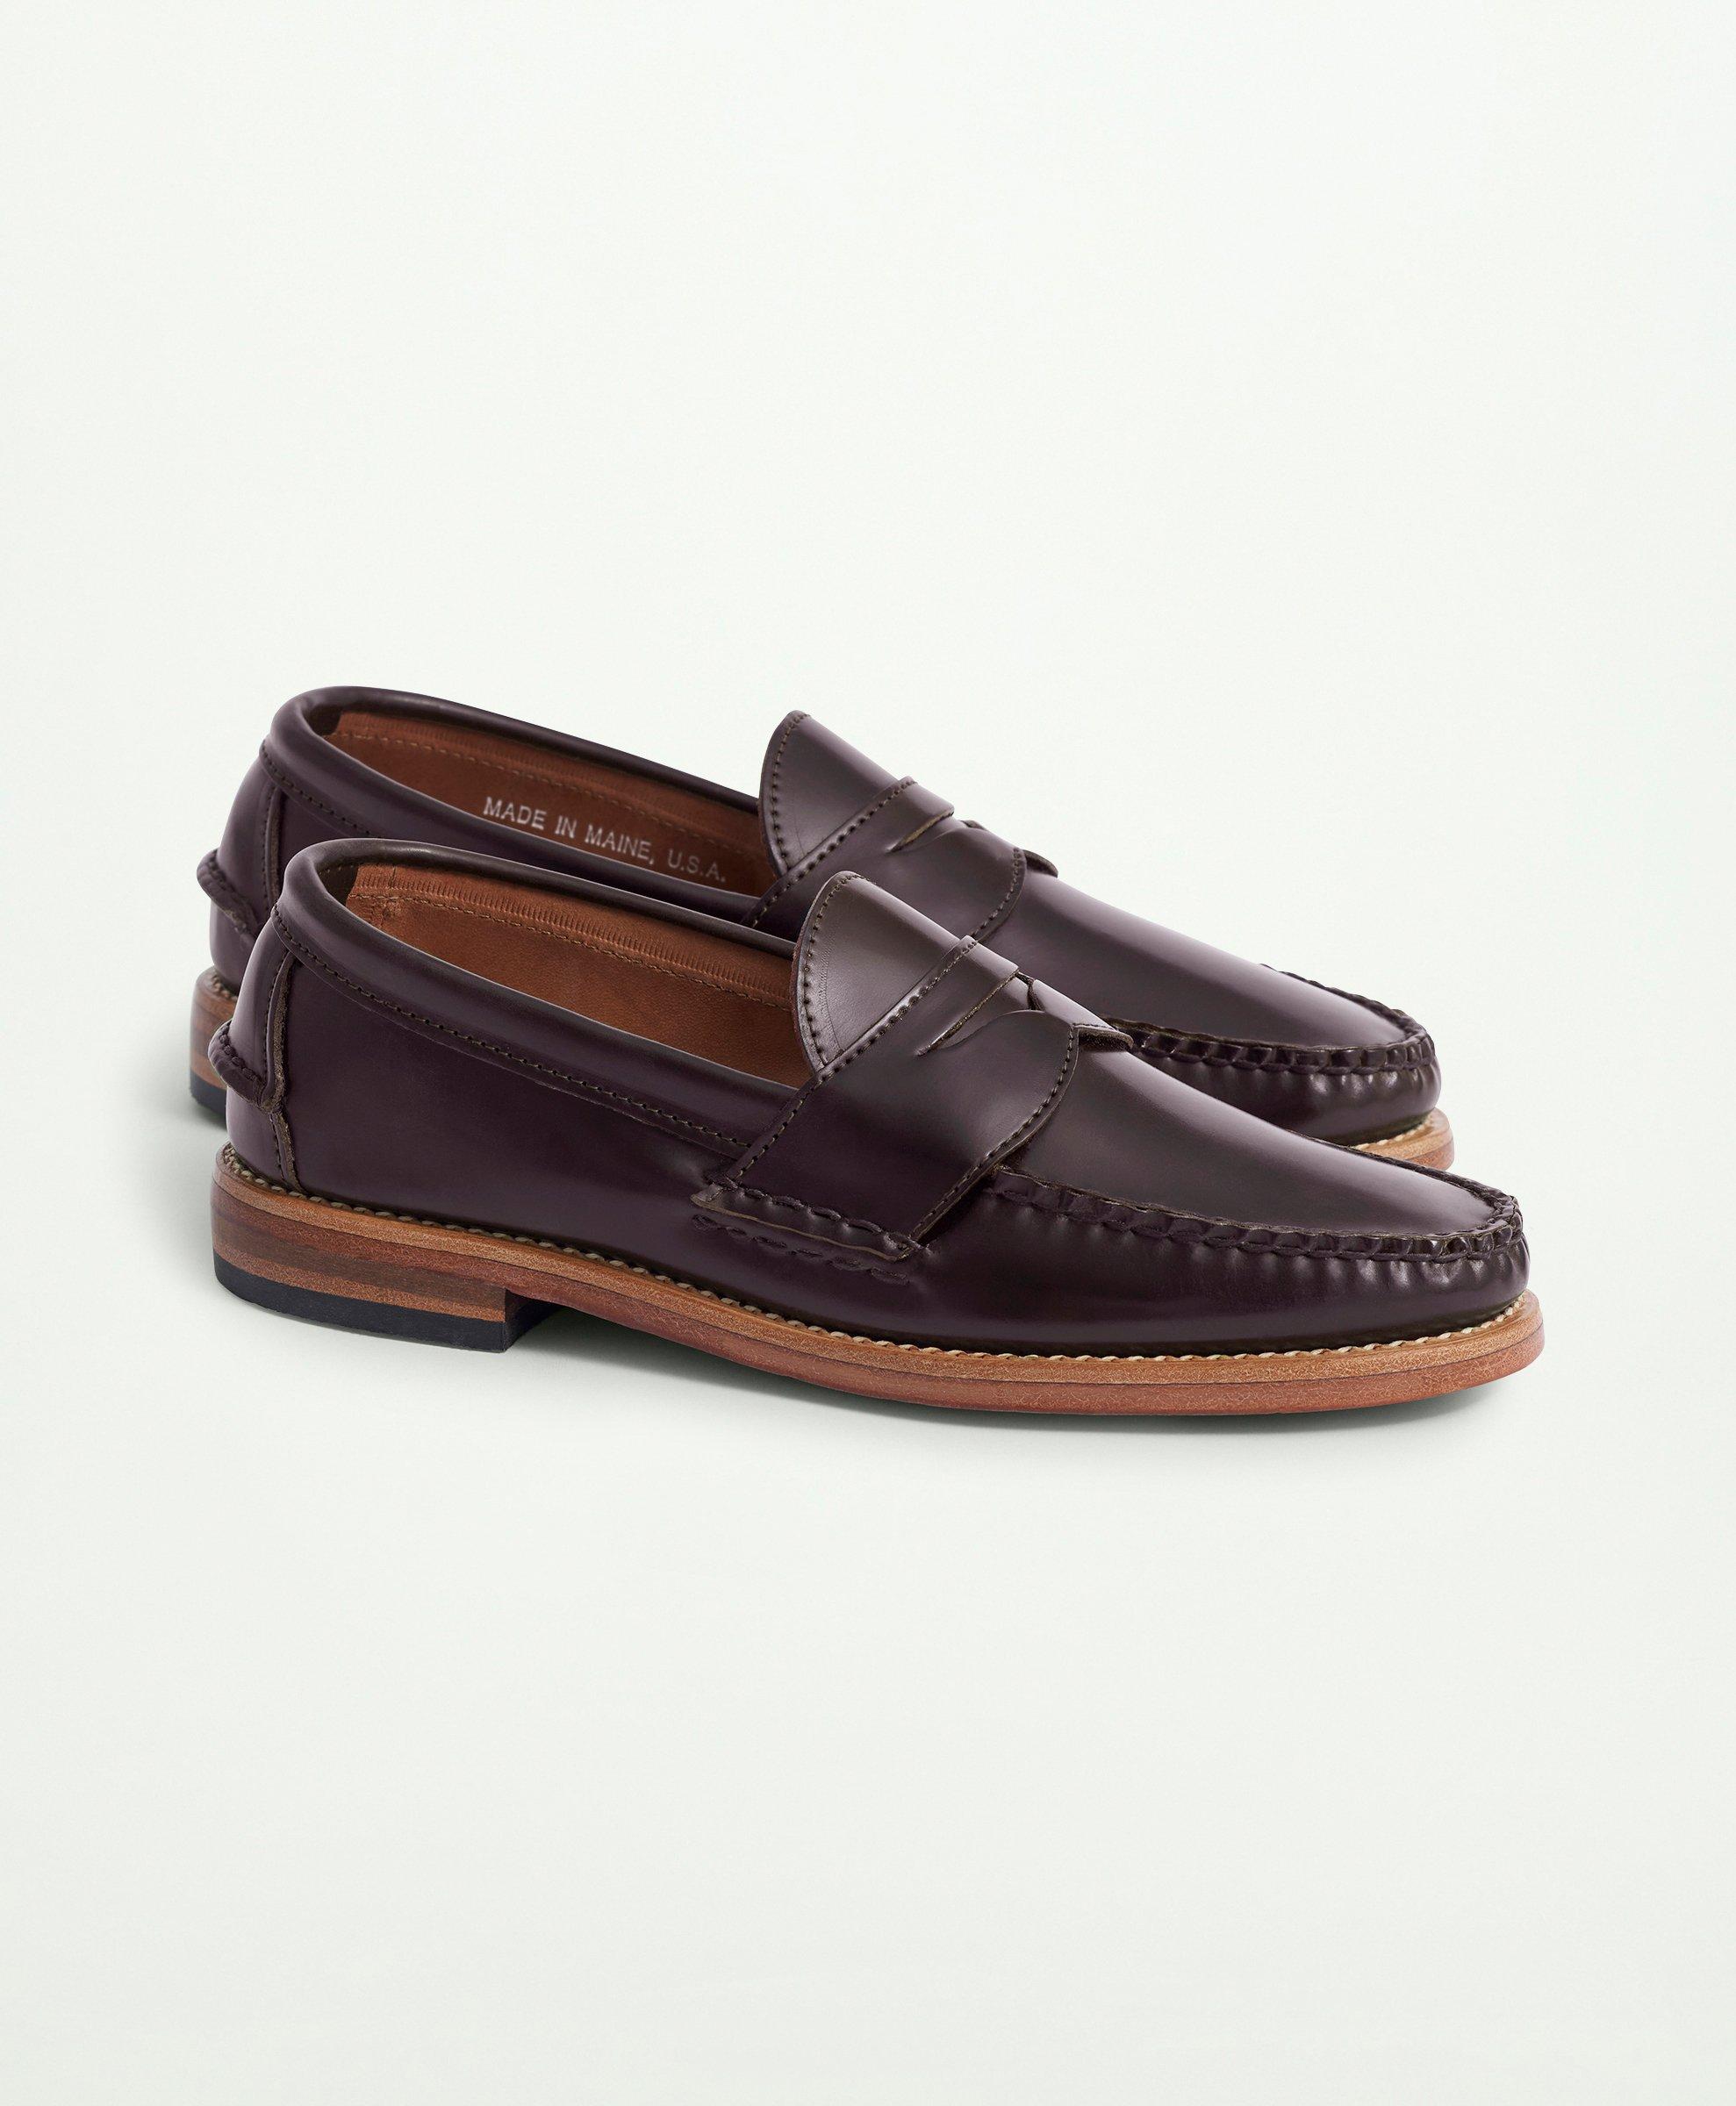 Pinch Penny Loafers - Chocolate Burnished Alligator, Rancourt & Co.